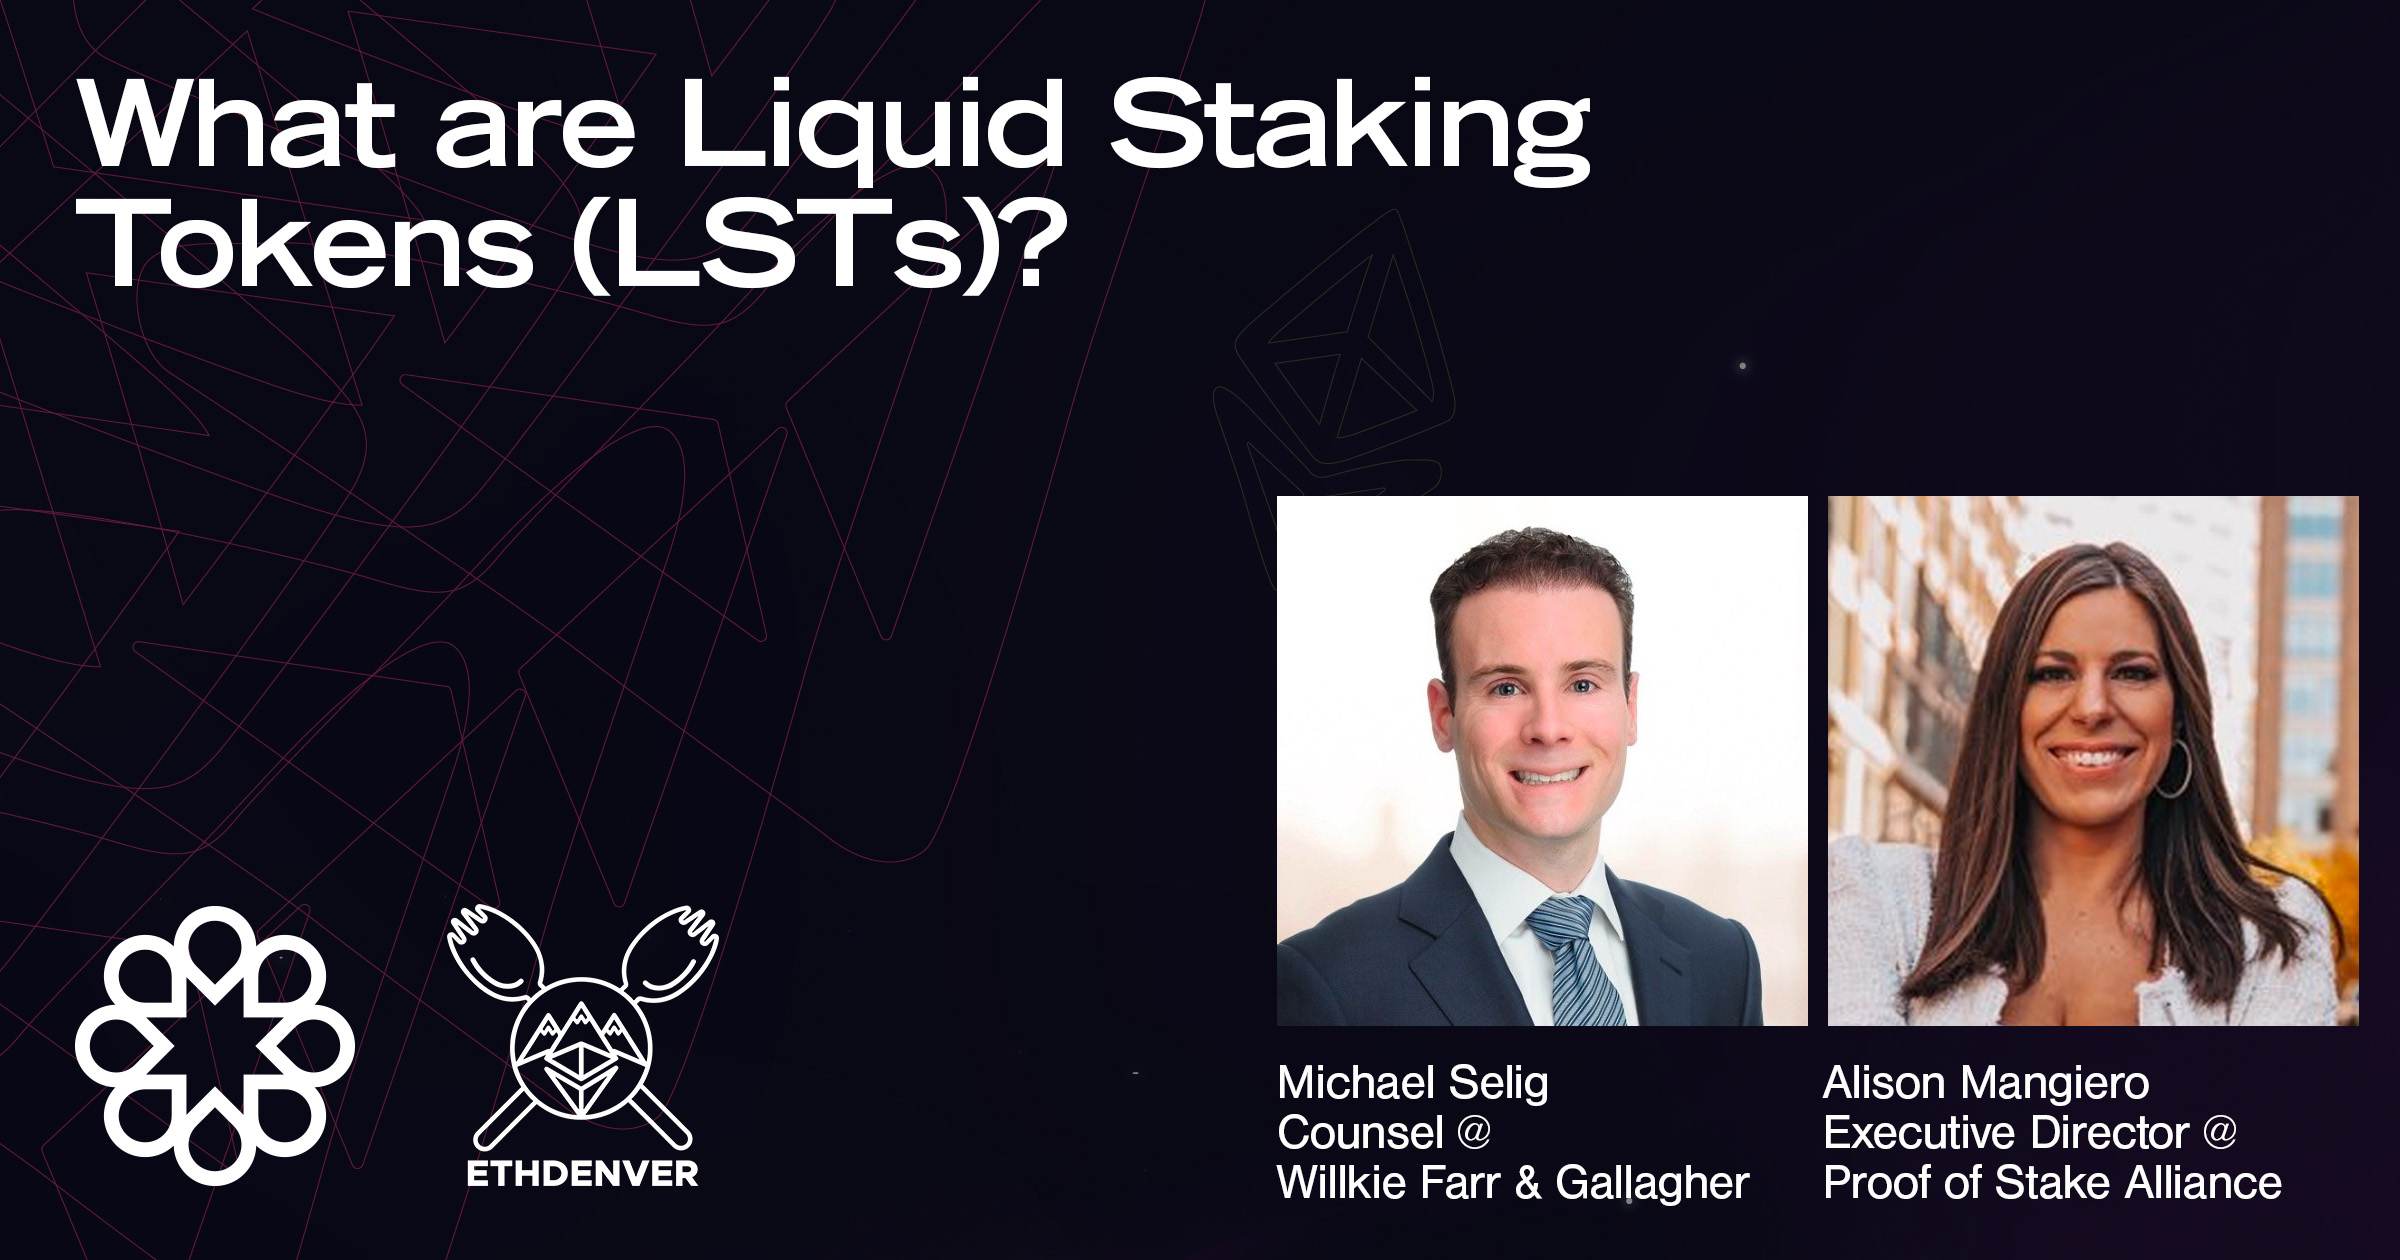 What are Liquid Staking Tokens (LSTs)? Mike Selig and Alison Mangiero discuss at ETHDenver